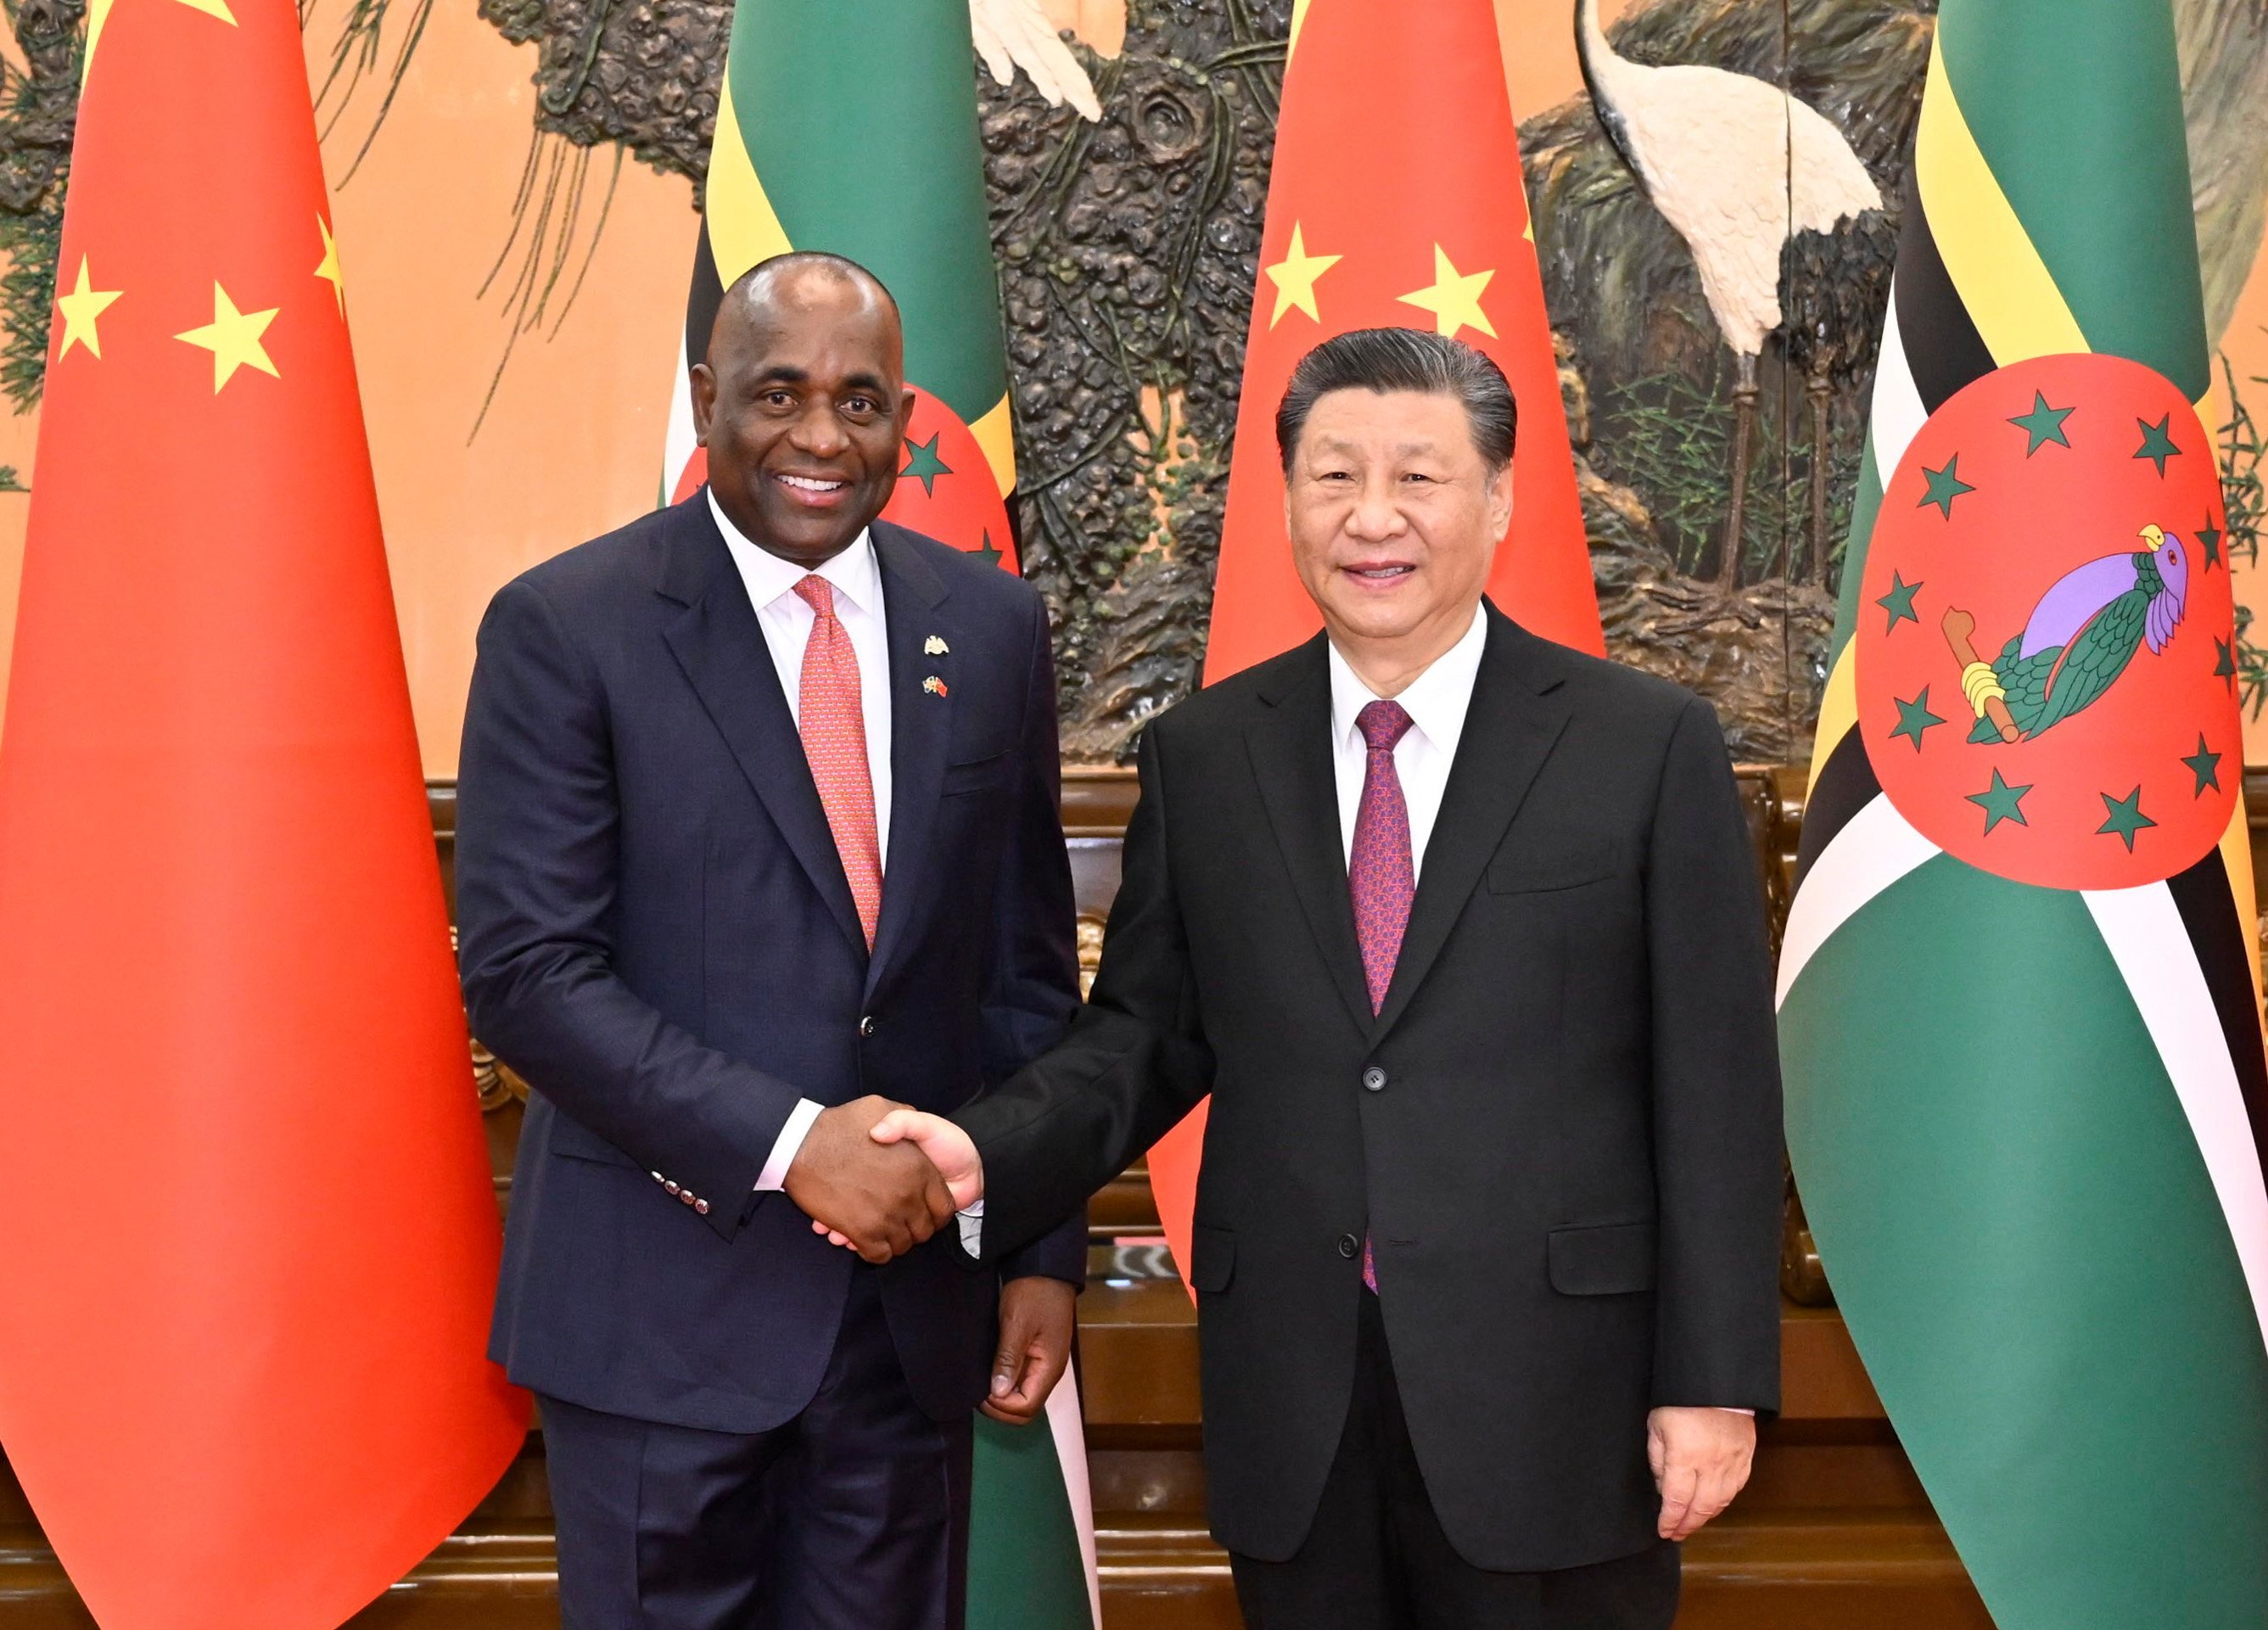 Dominican Prime Minister Roosevelt Skerrit is welcomed to the Great Hall of the People in Beijing by Chinese President Xi Jinping on Monday. Photo: EPA